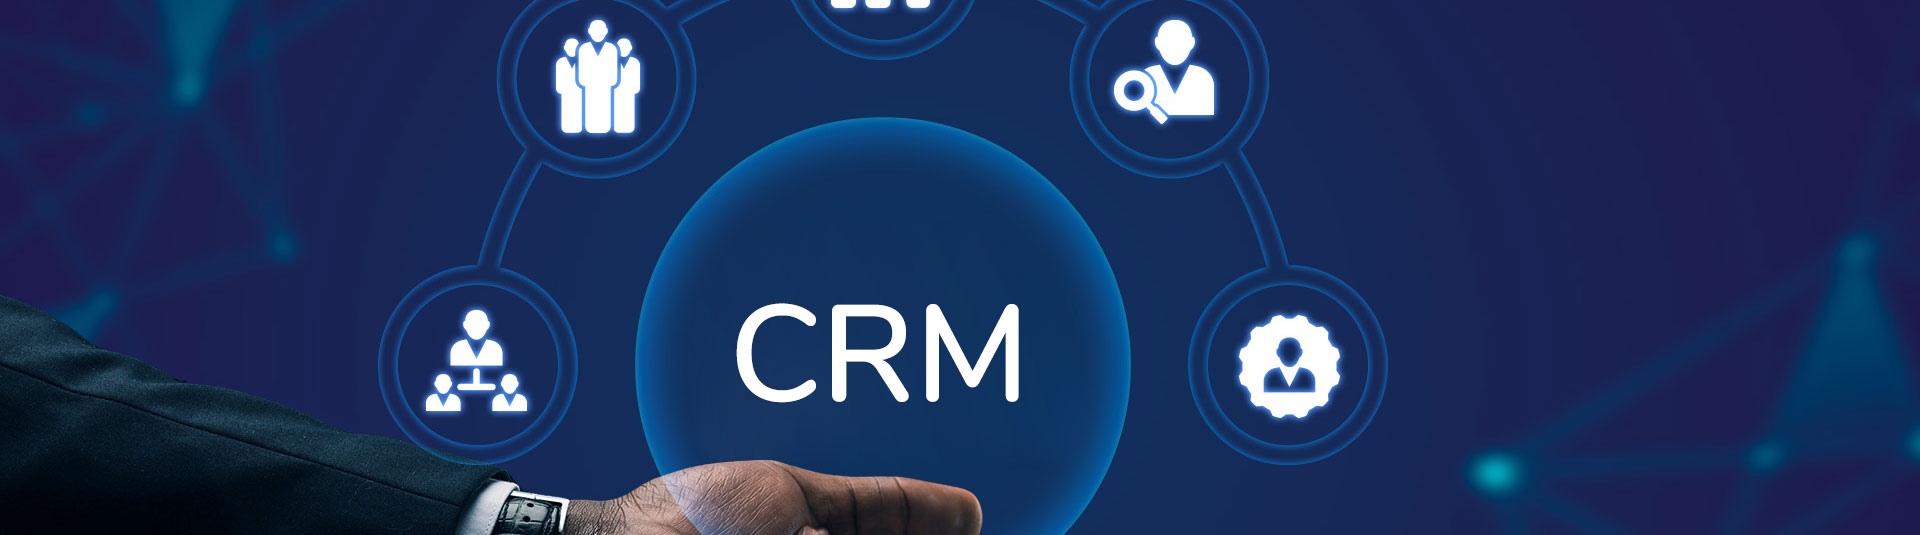 Salesforce for CRM